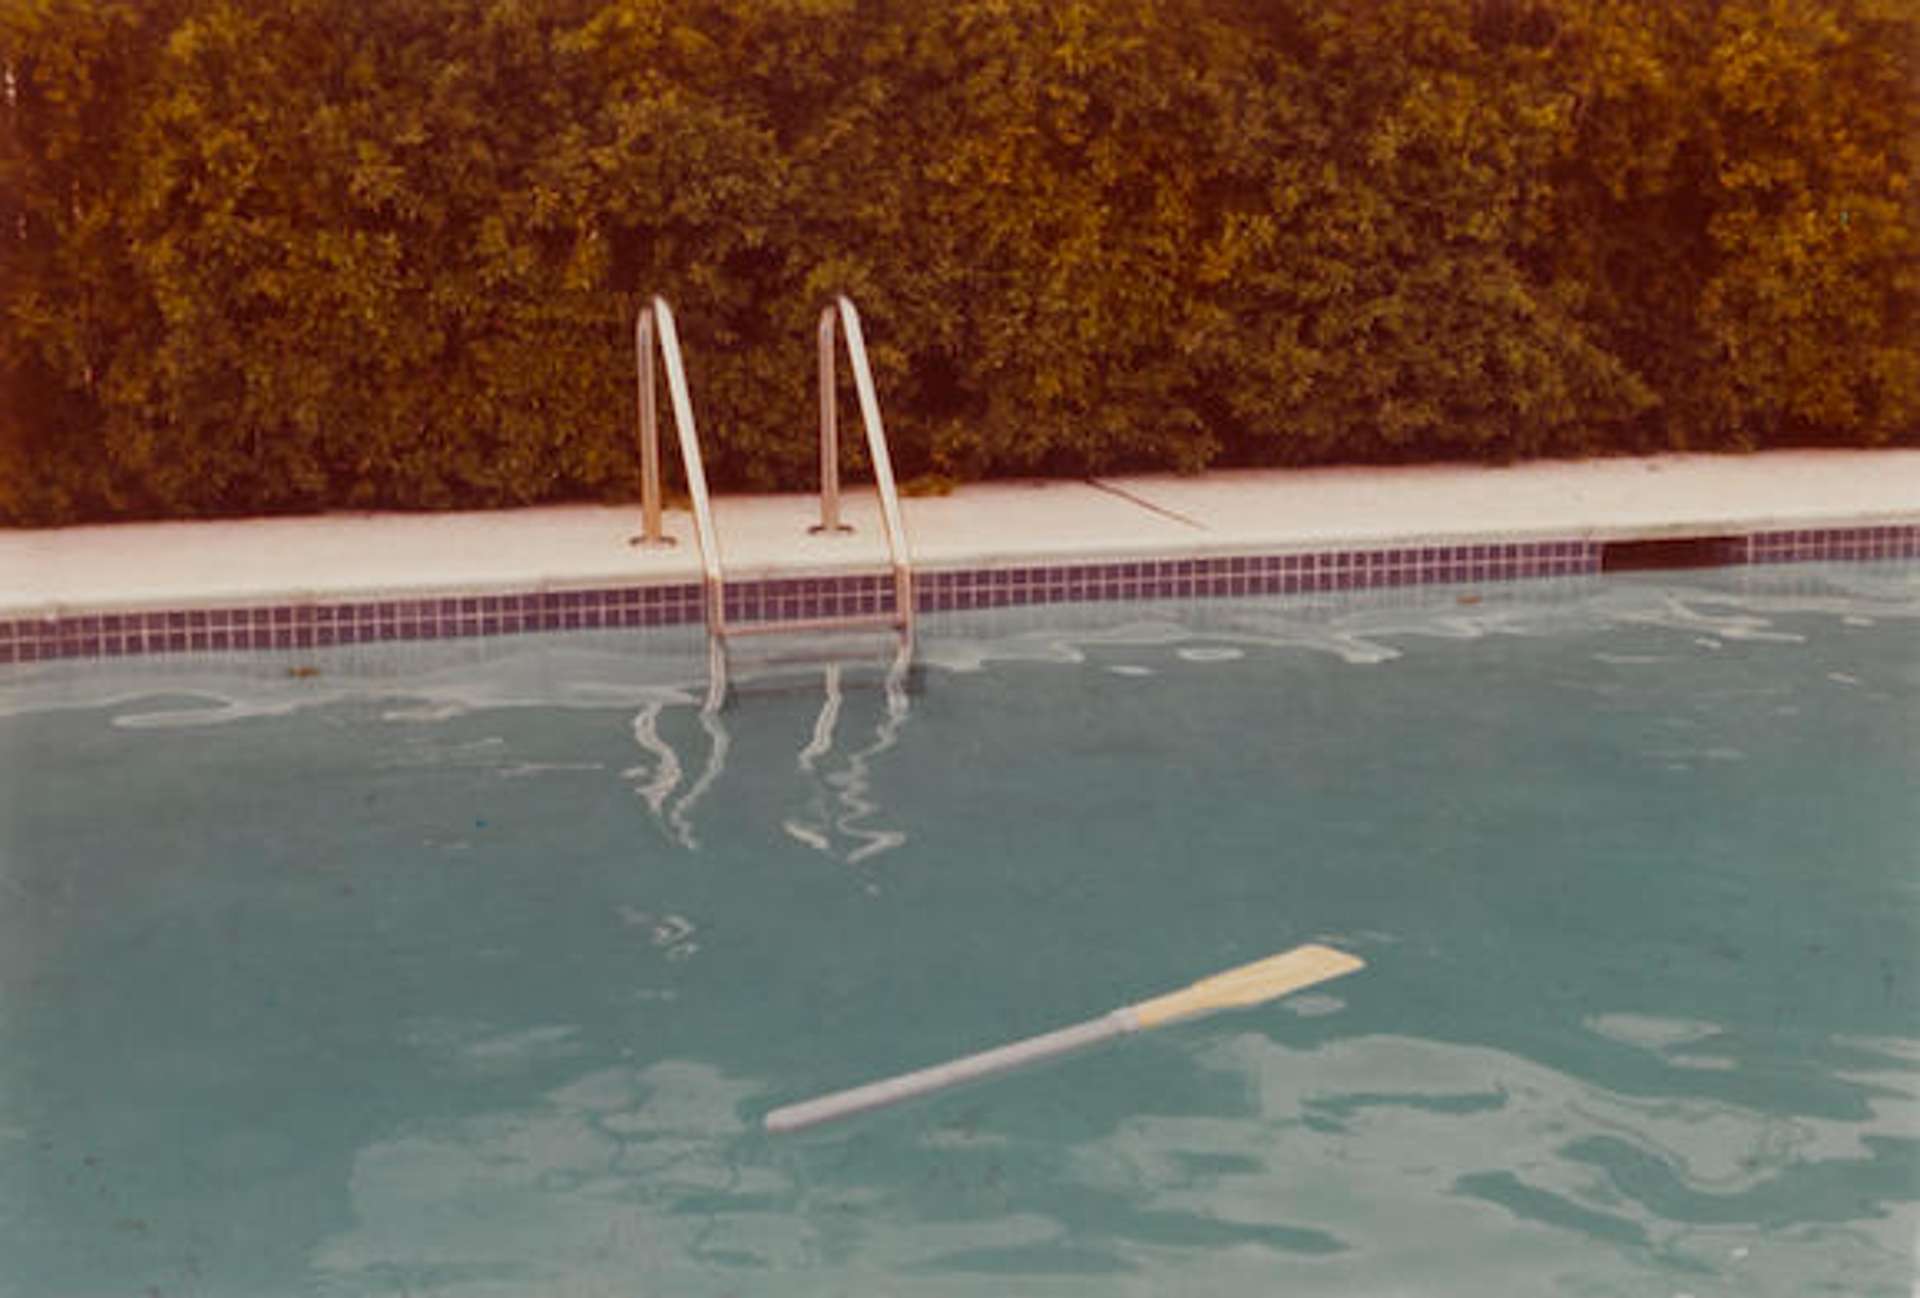 A photograph taken by David Hockney of a swimming pool in California.